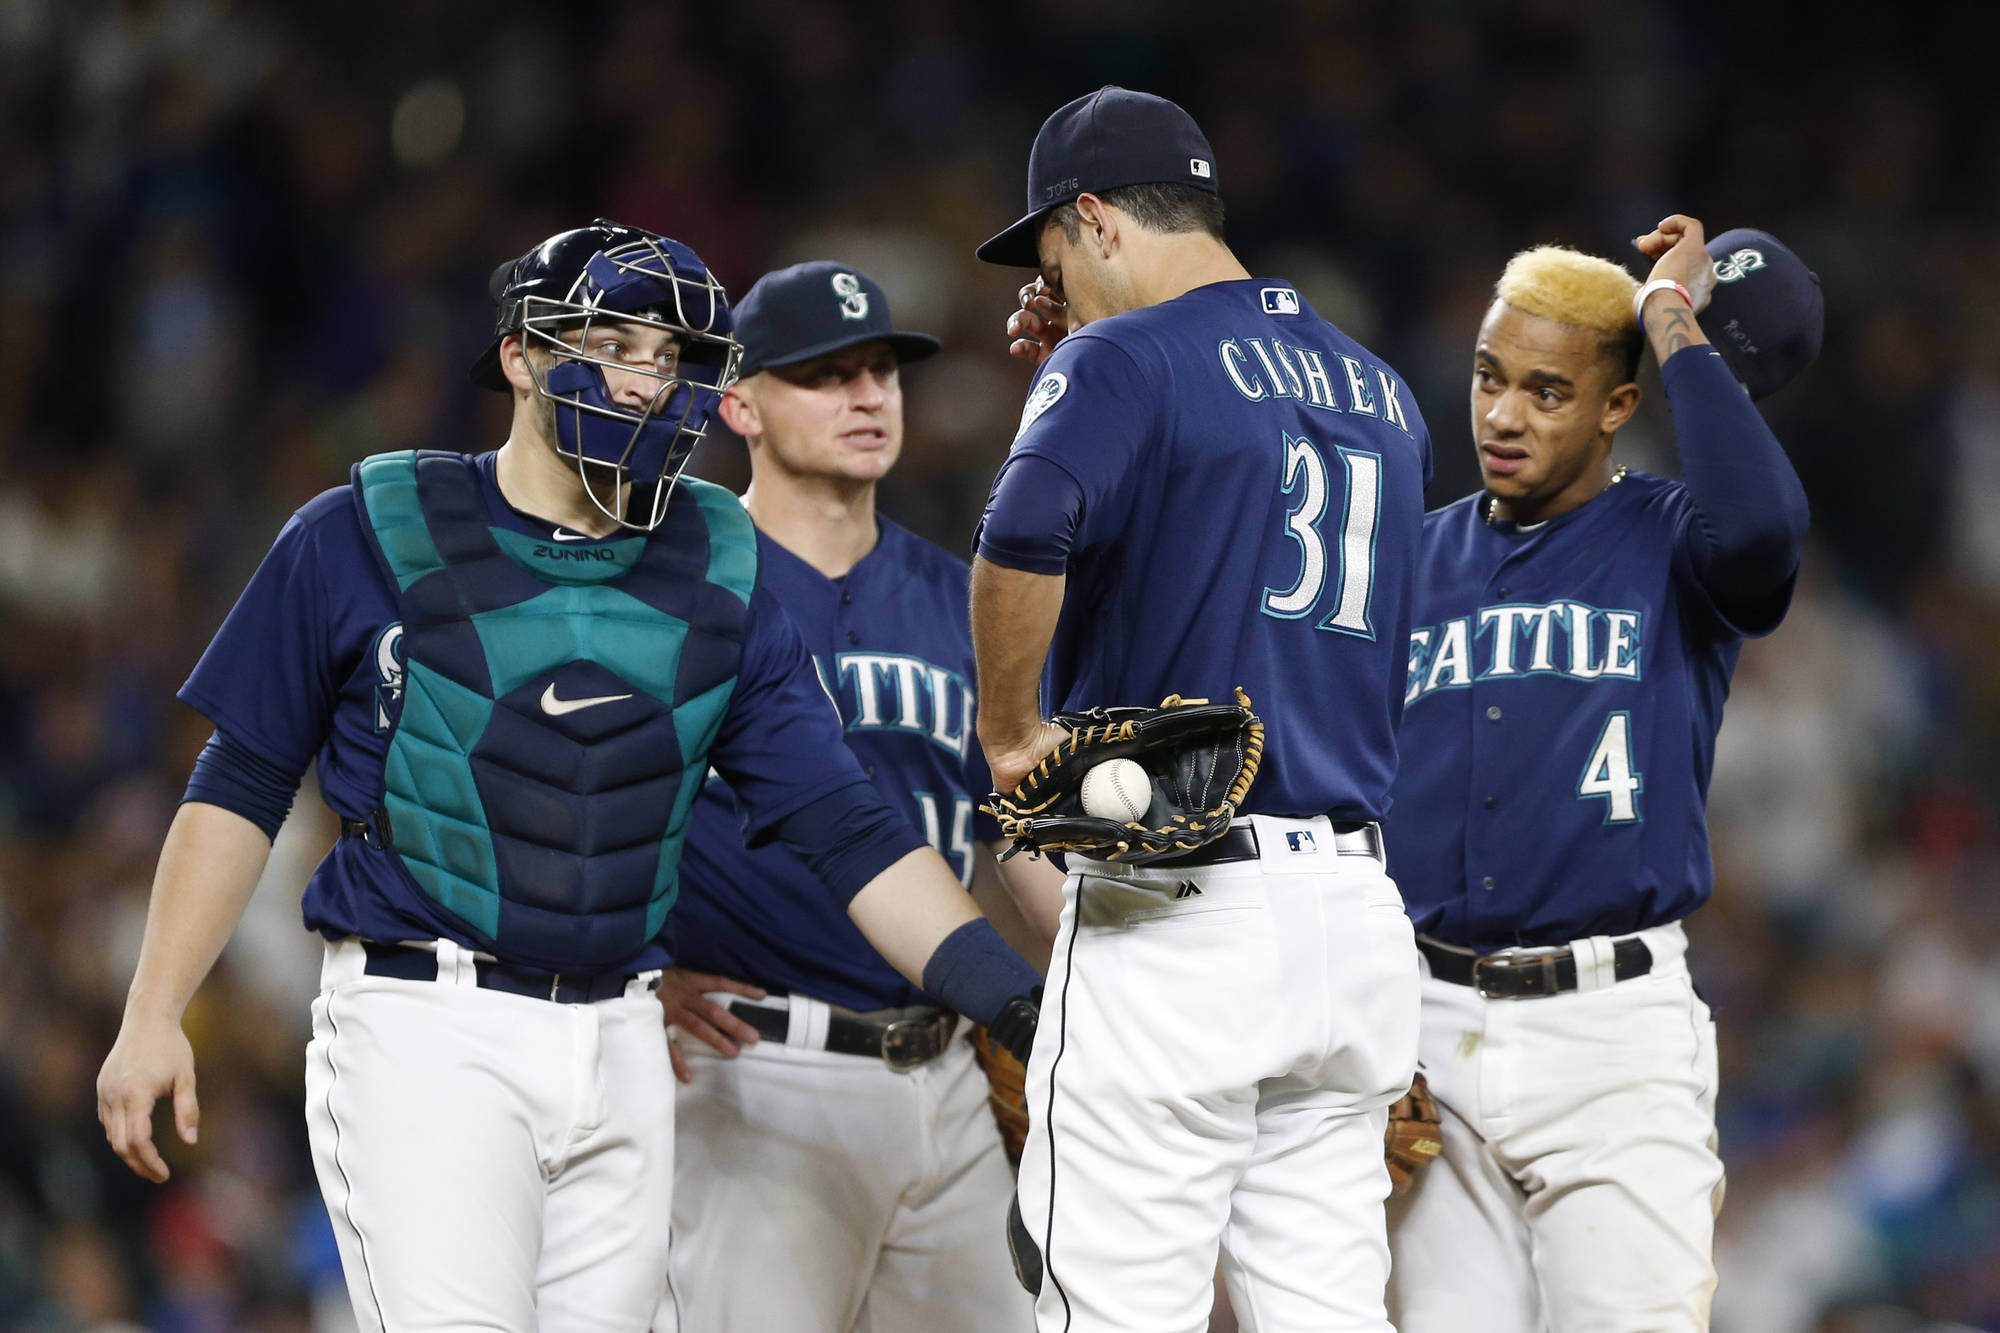 Mariners fall to A's in back-and-forth thriller, get eliminated from Post-Season contention